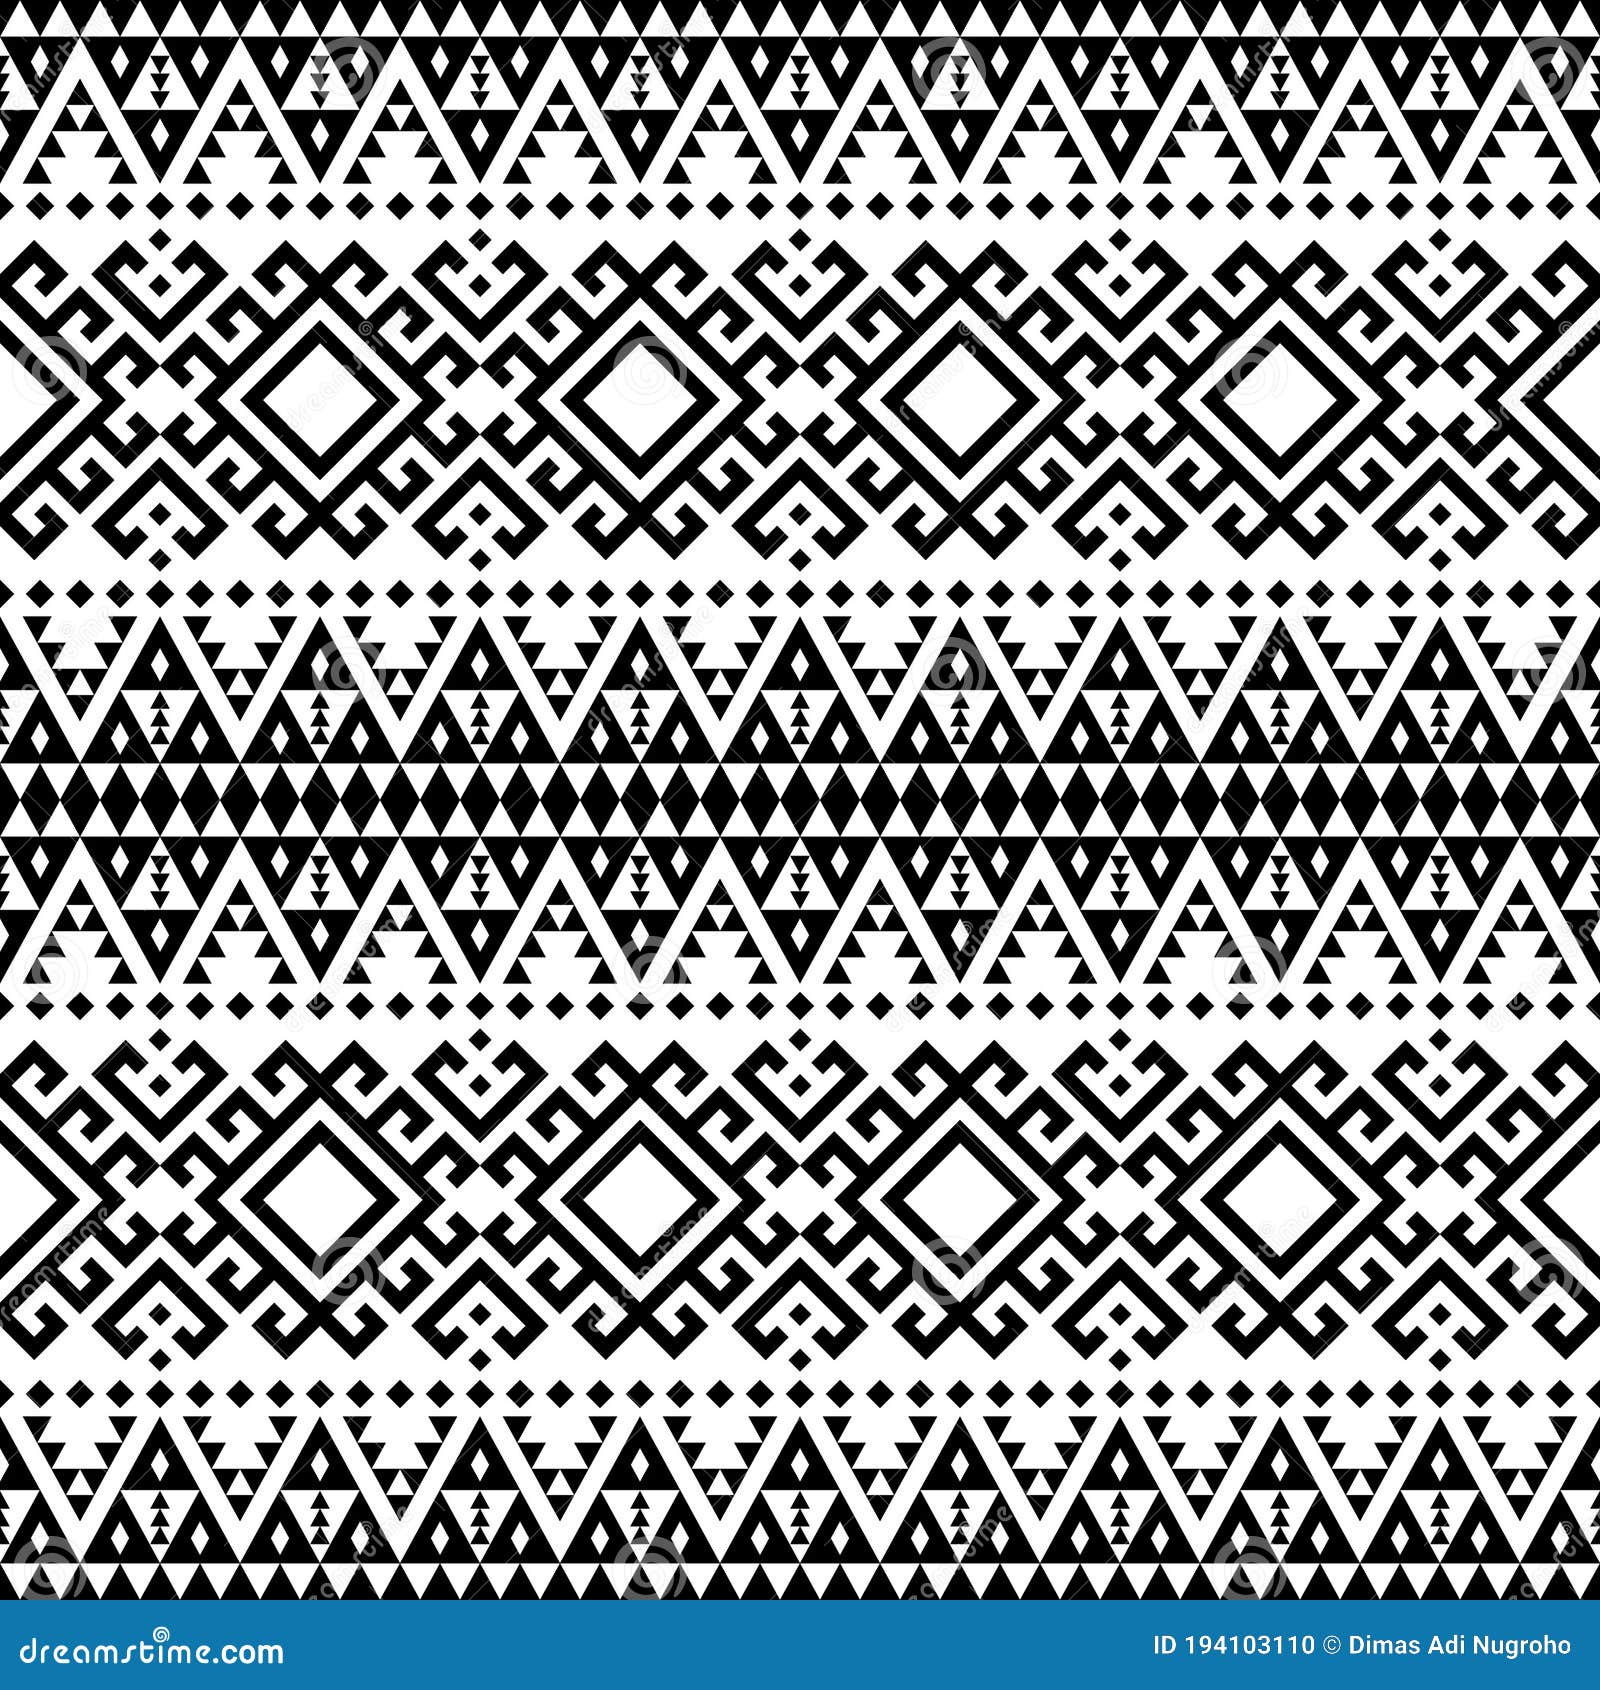 Ikat Aztec Ethnic Seamless Pattern Design in Black and White Color ...